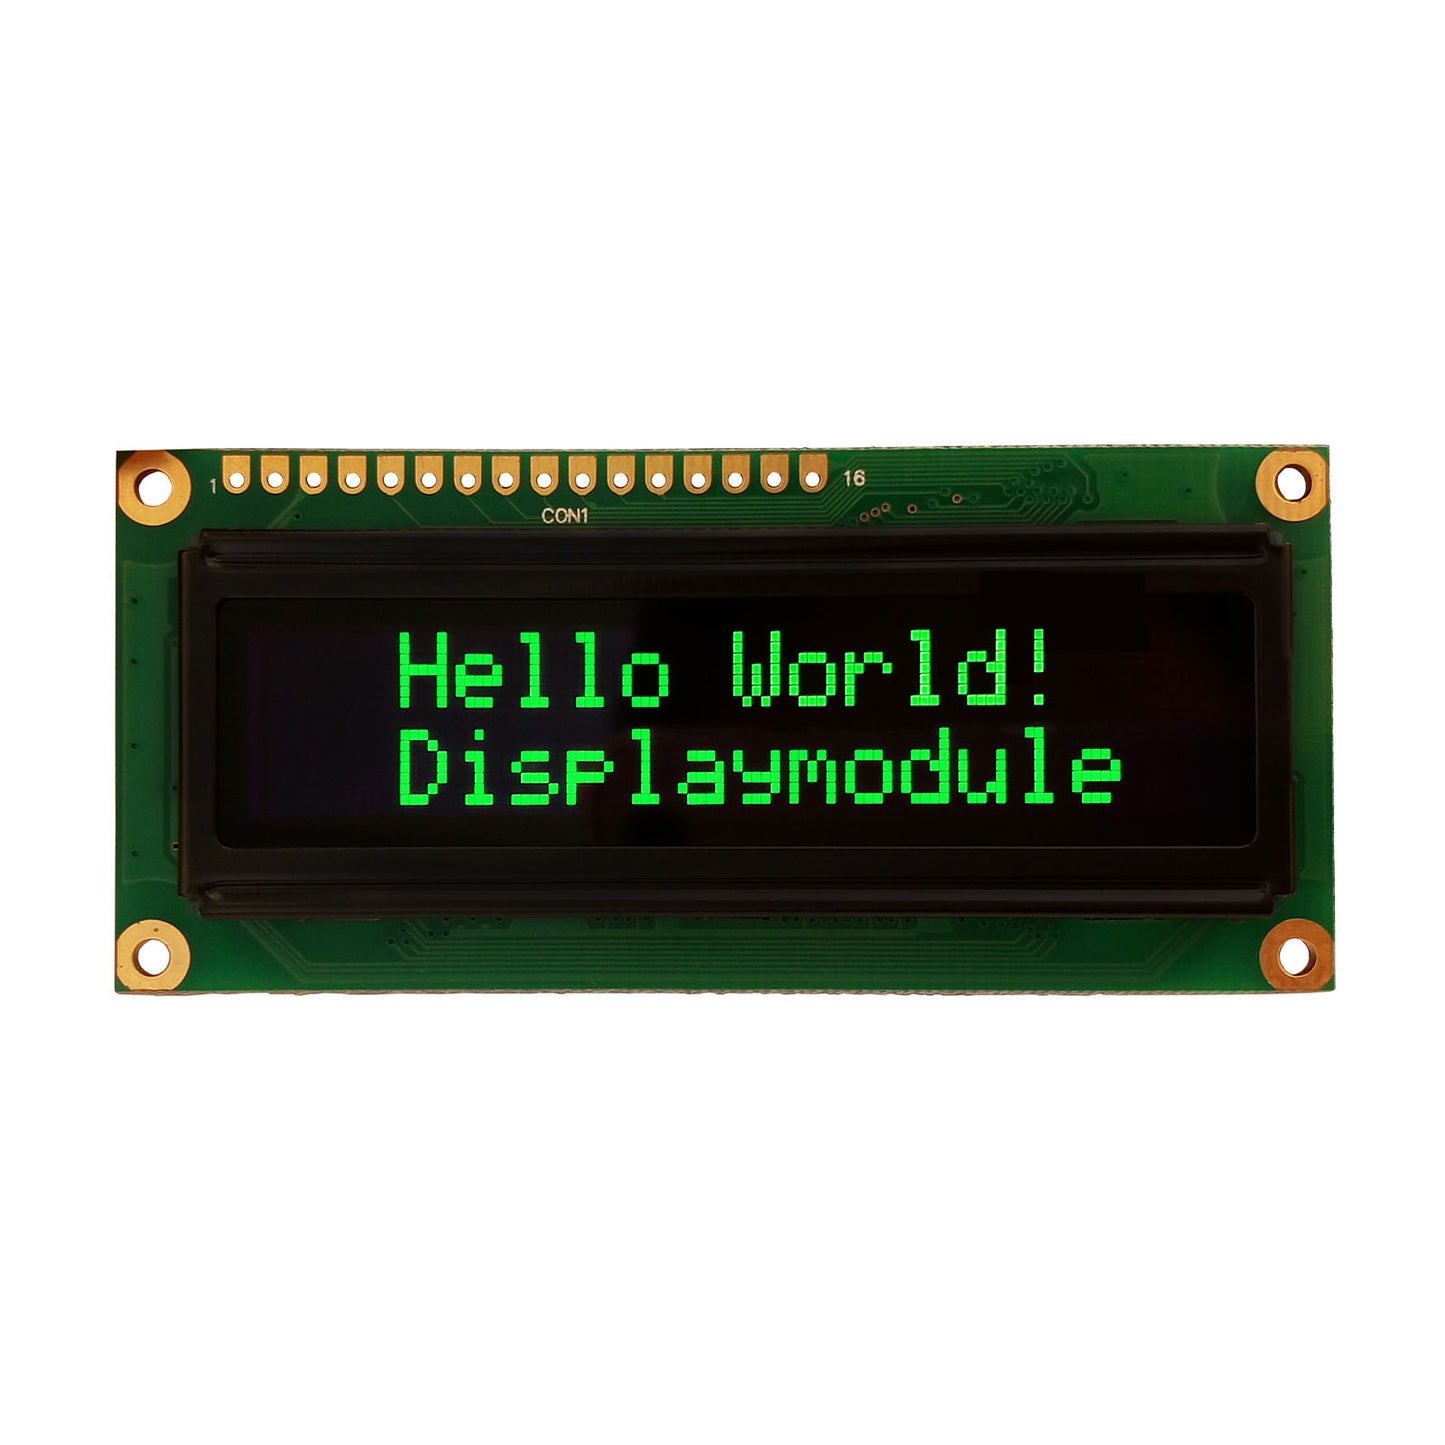 16x2 green OLED character display module showing "Hello World! Displaymodule" with MCU, SPI, and I2C interfaces